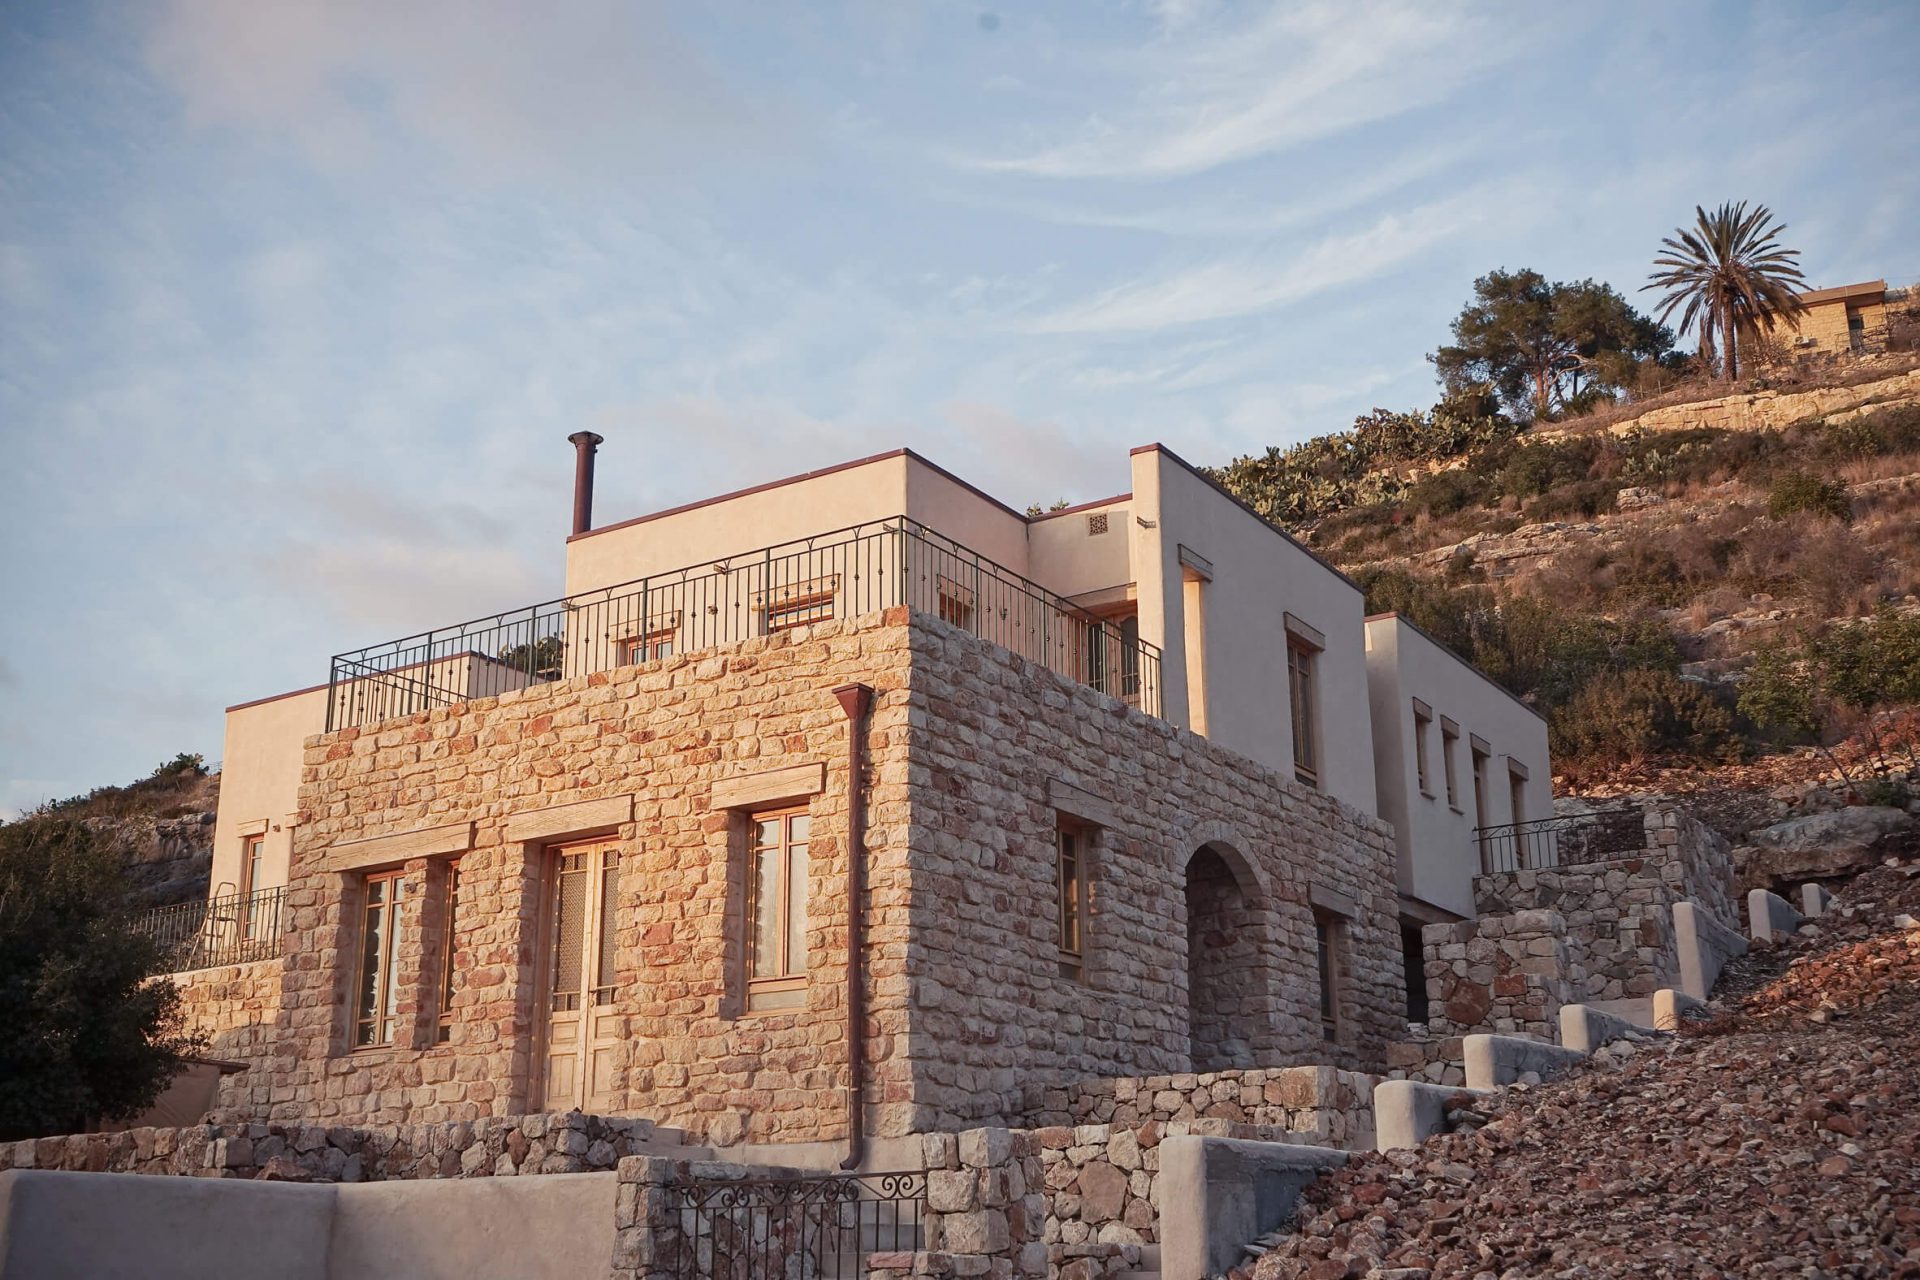 Hemp-made walls of Ein Hod ecological house blends with the environment